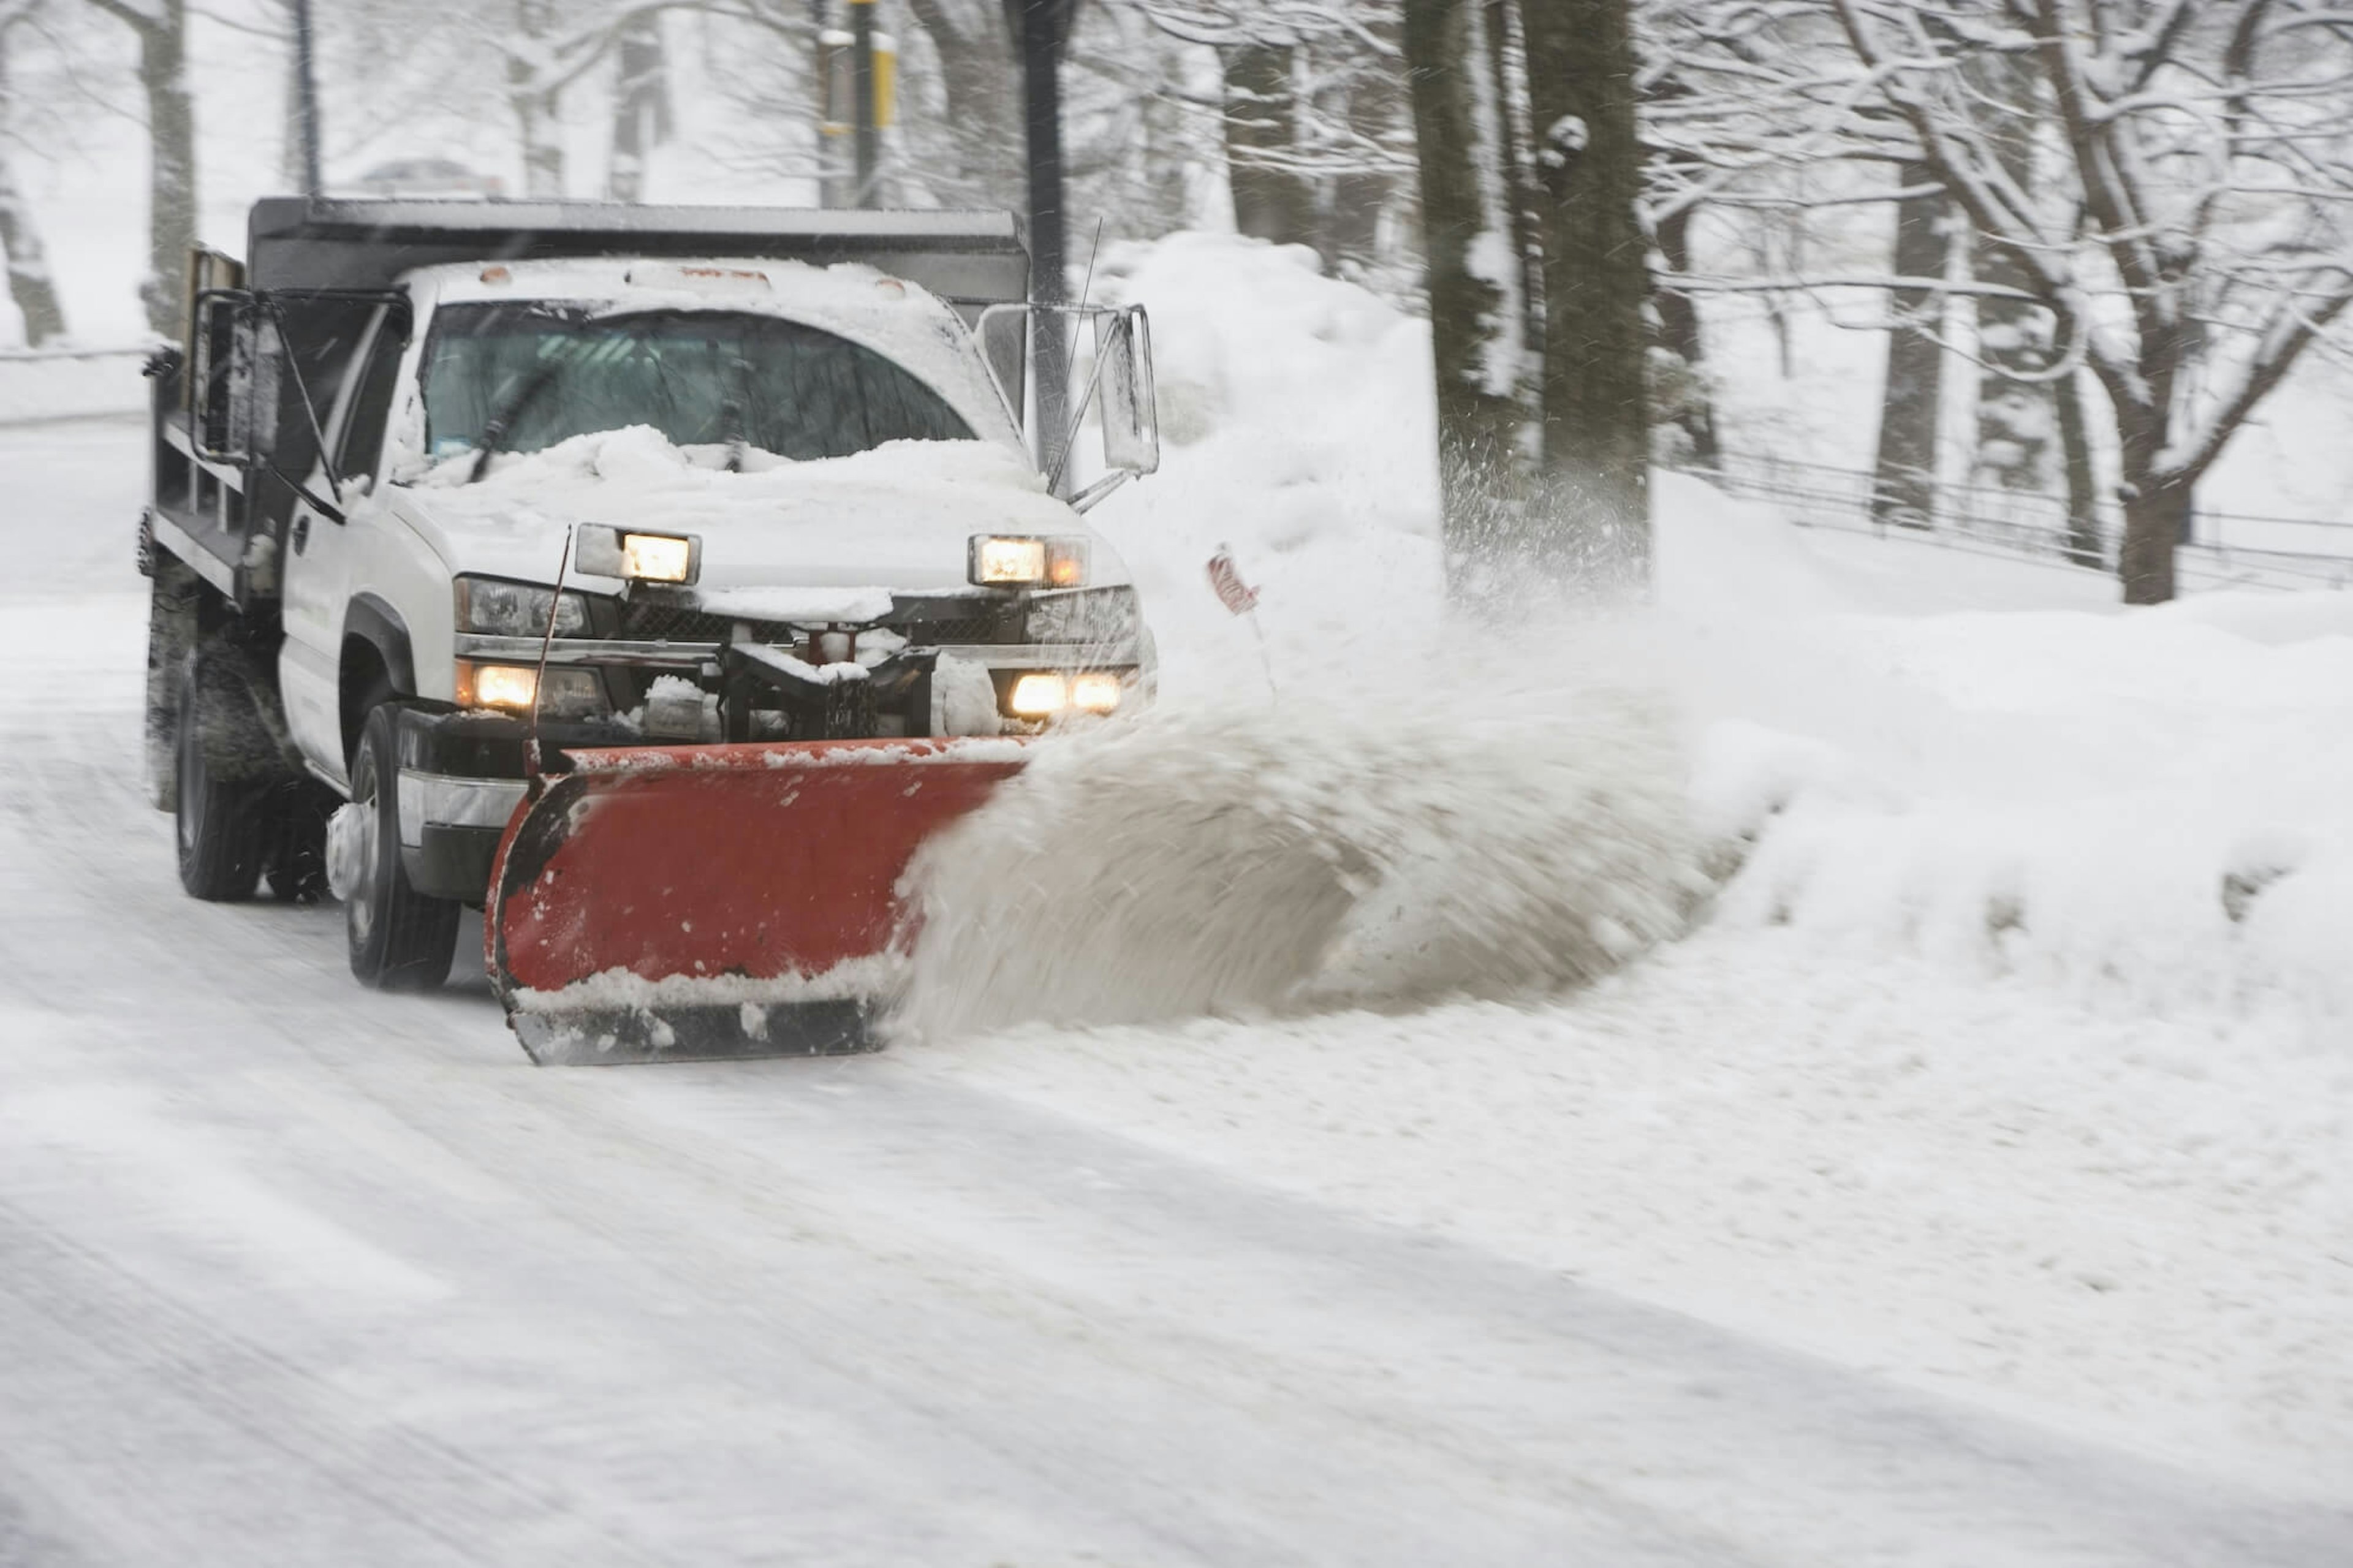 Municipalities Truck Plowing Snow in the Winter